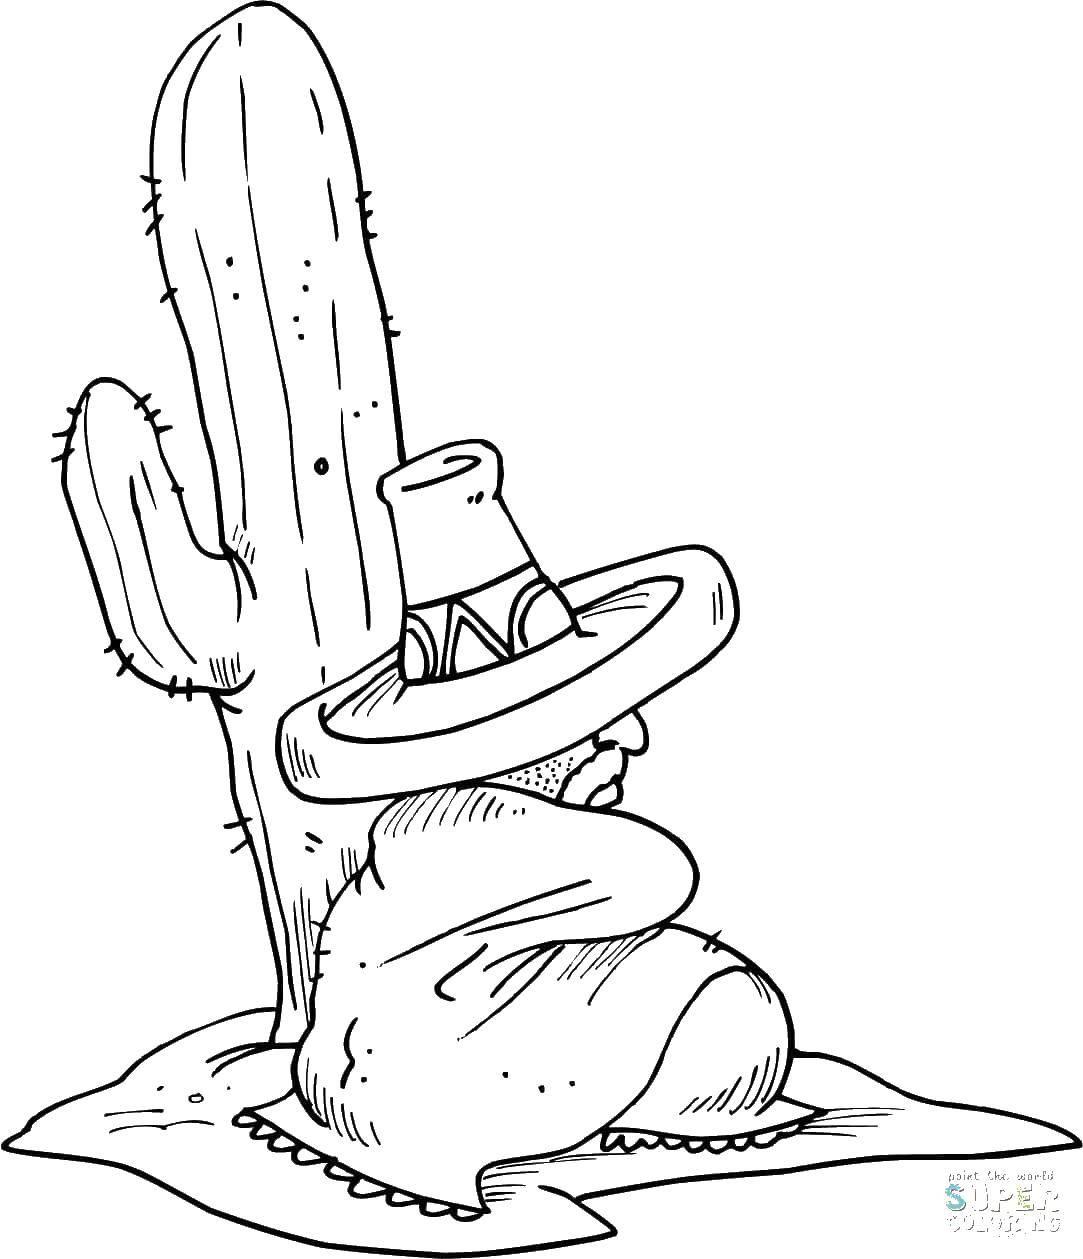 Coloring Wild West. Category Desert. Tags:  desert, cactus, wild West.